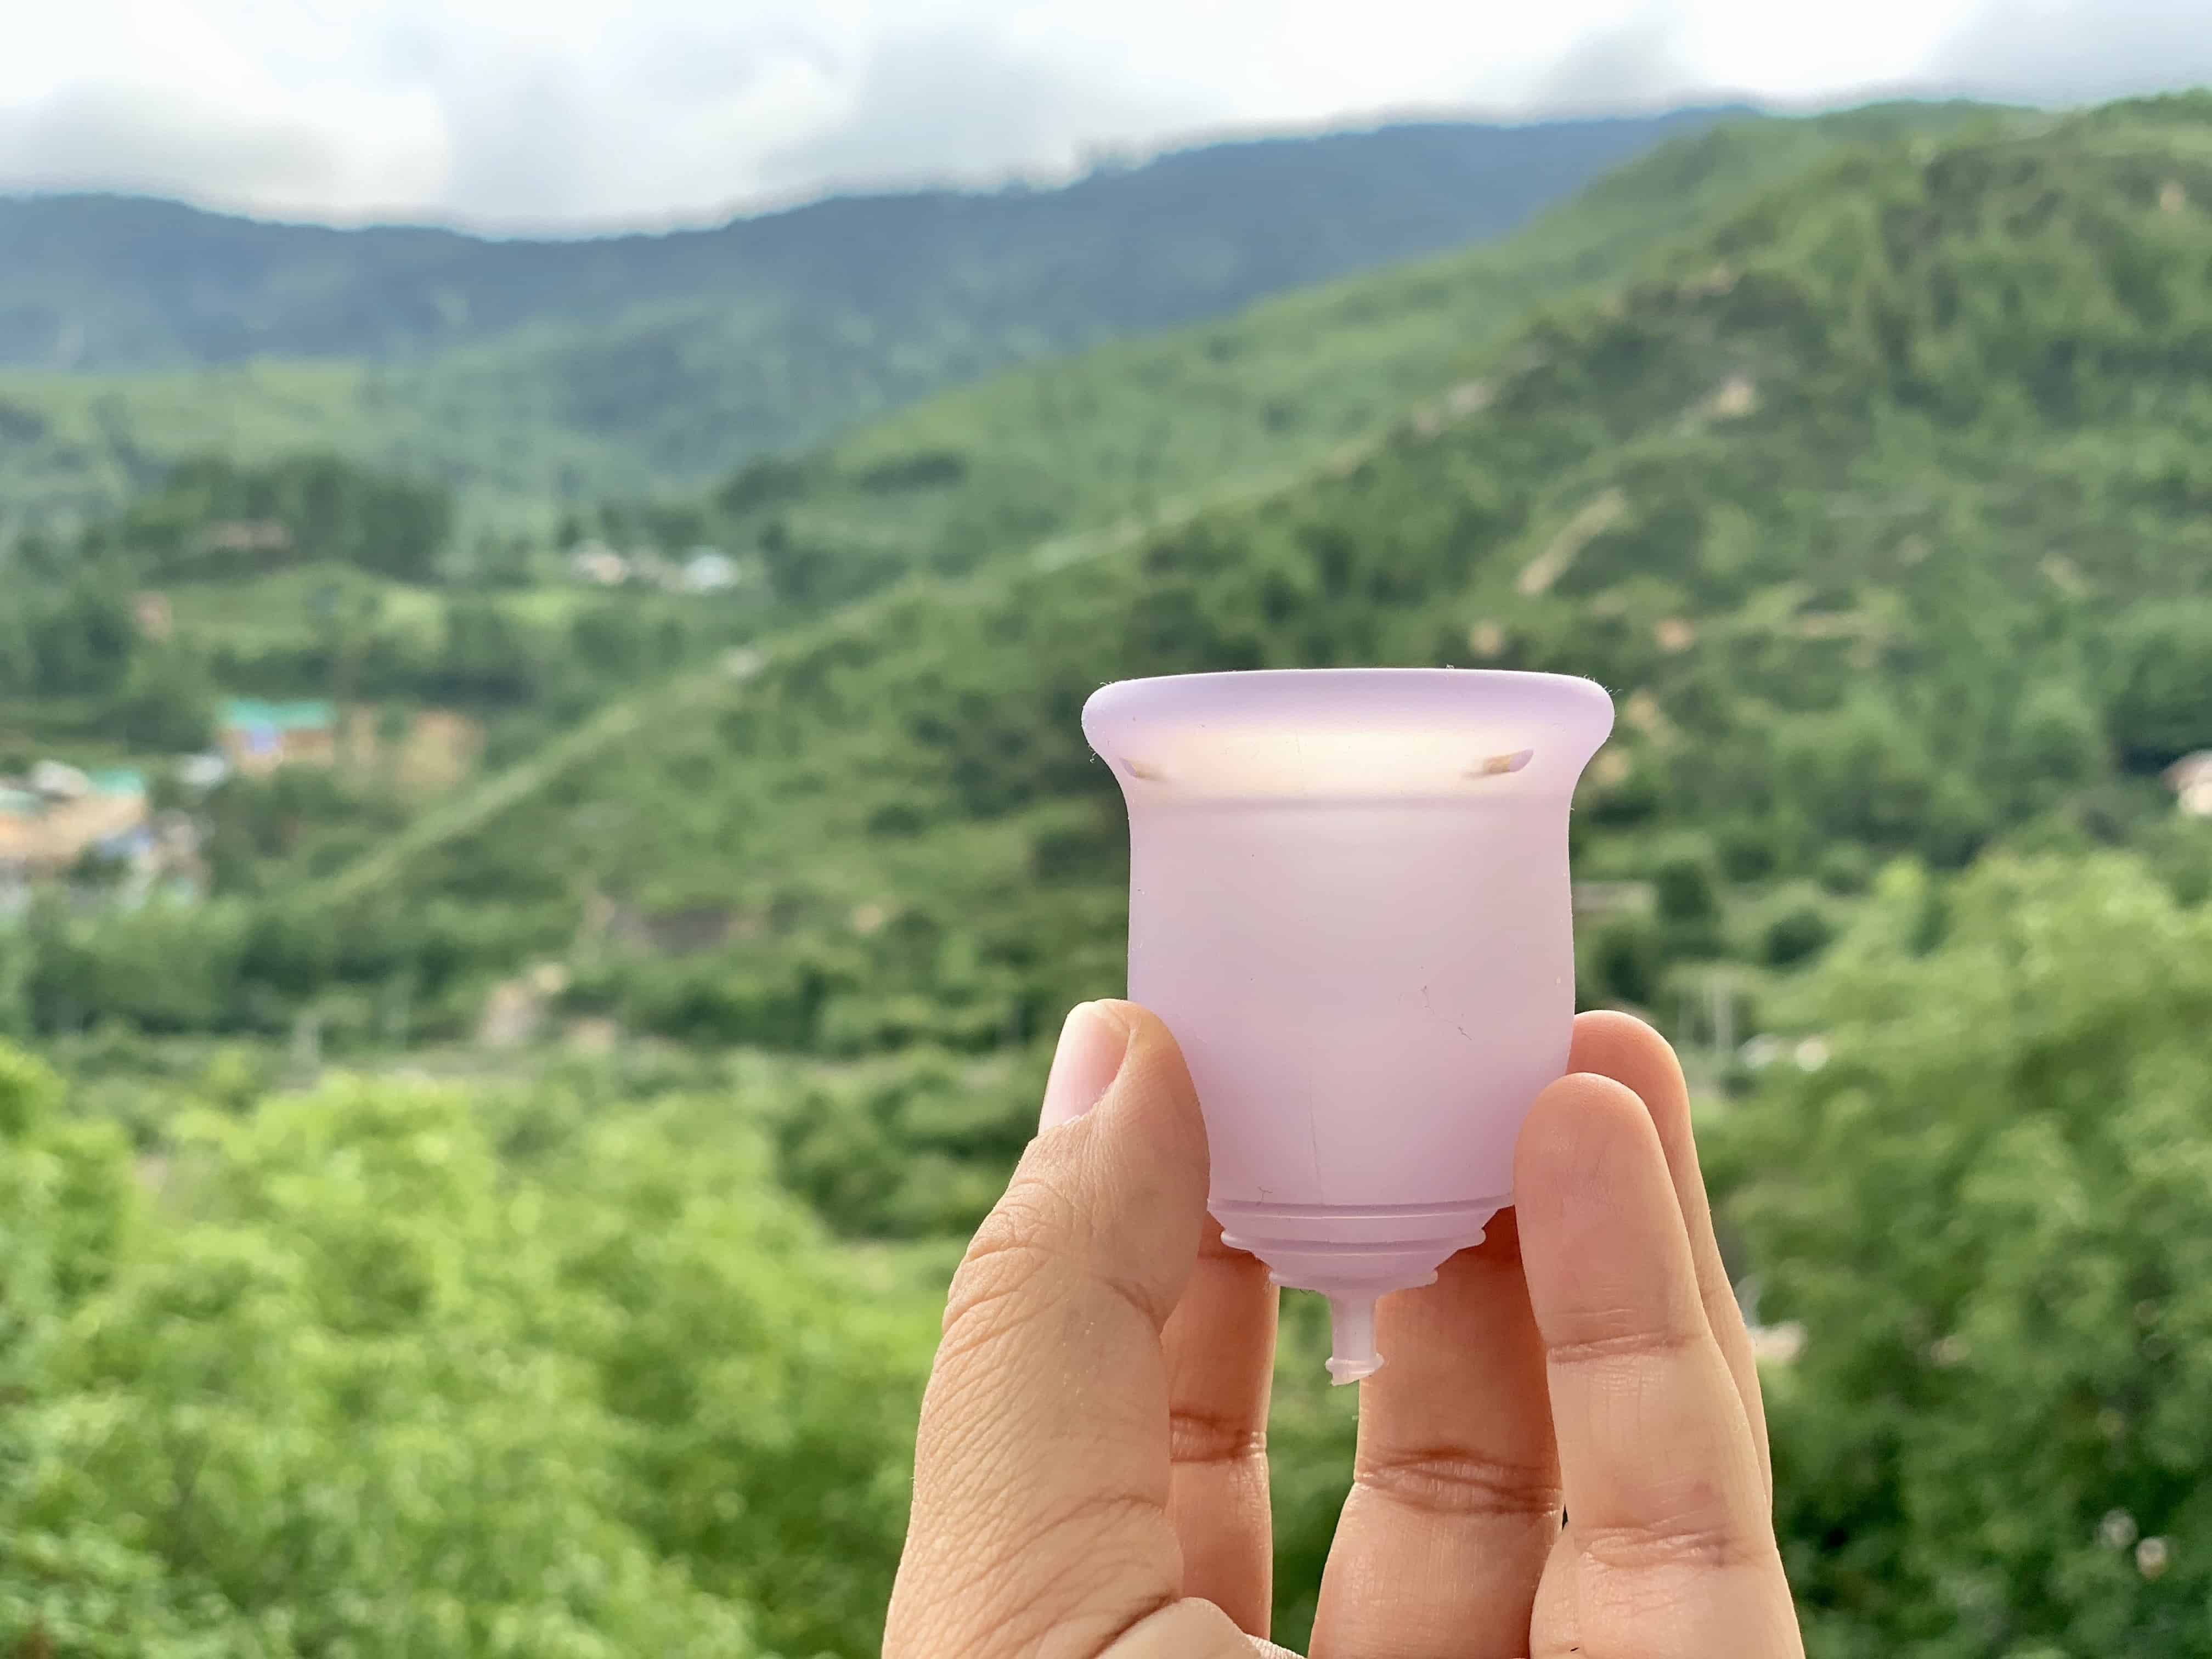 how to use a menstrual cup, menstrual cup tips, why use a menstrual cup